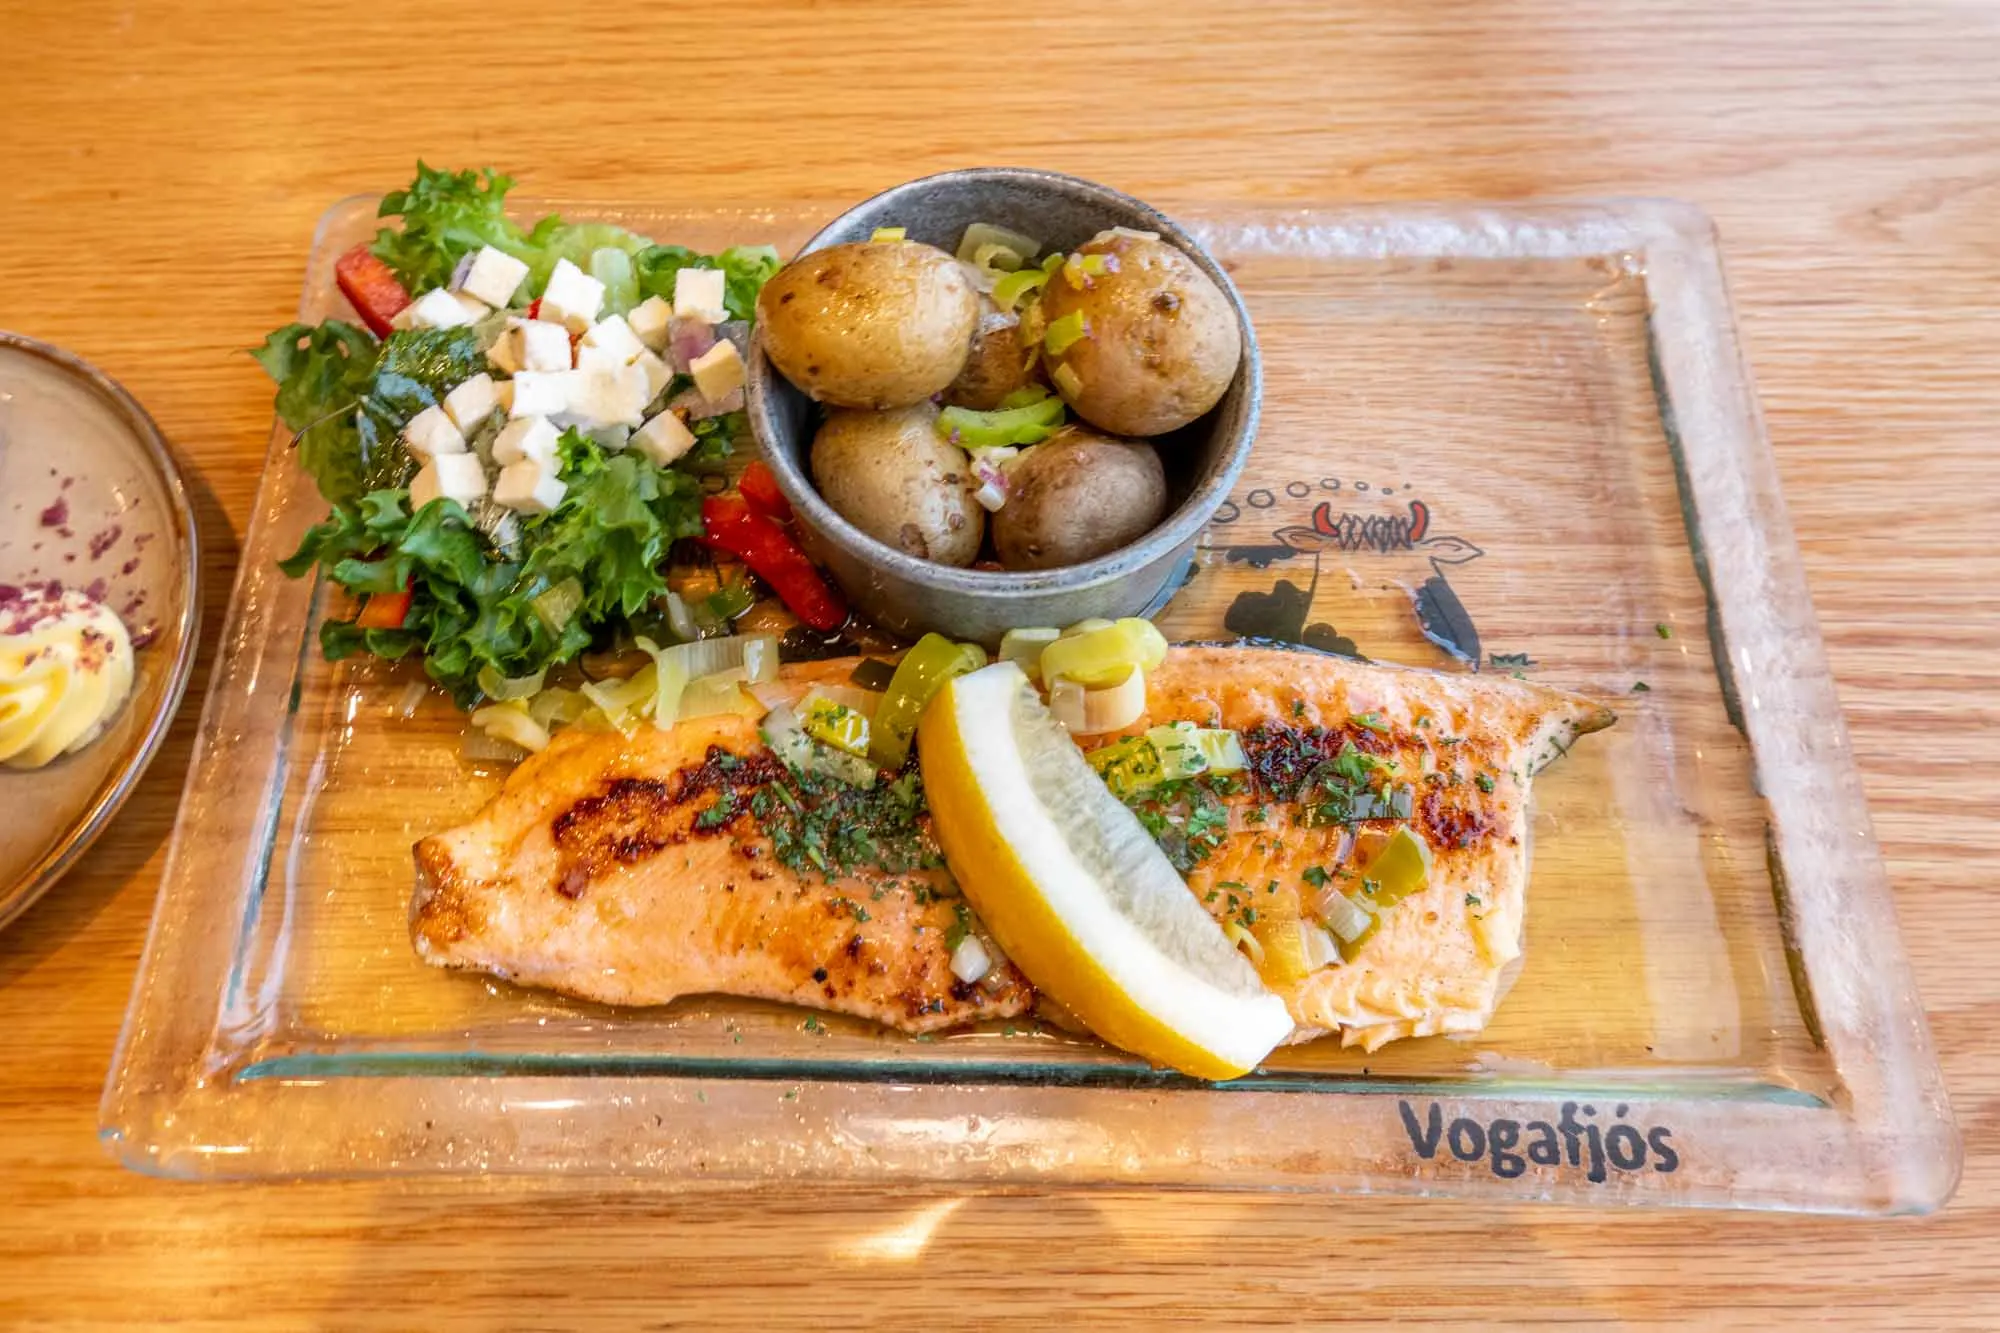 Arctic char with potatoes and salad on a plate that says "Vogafos"